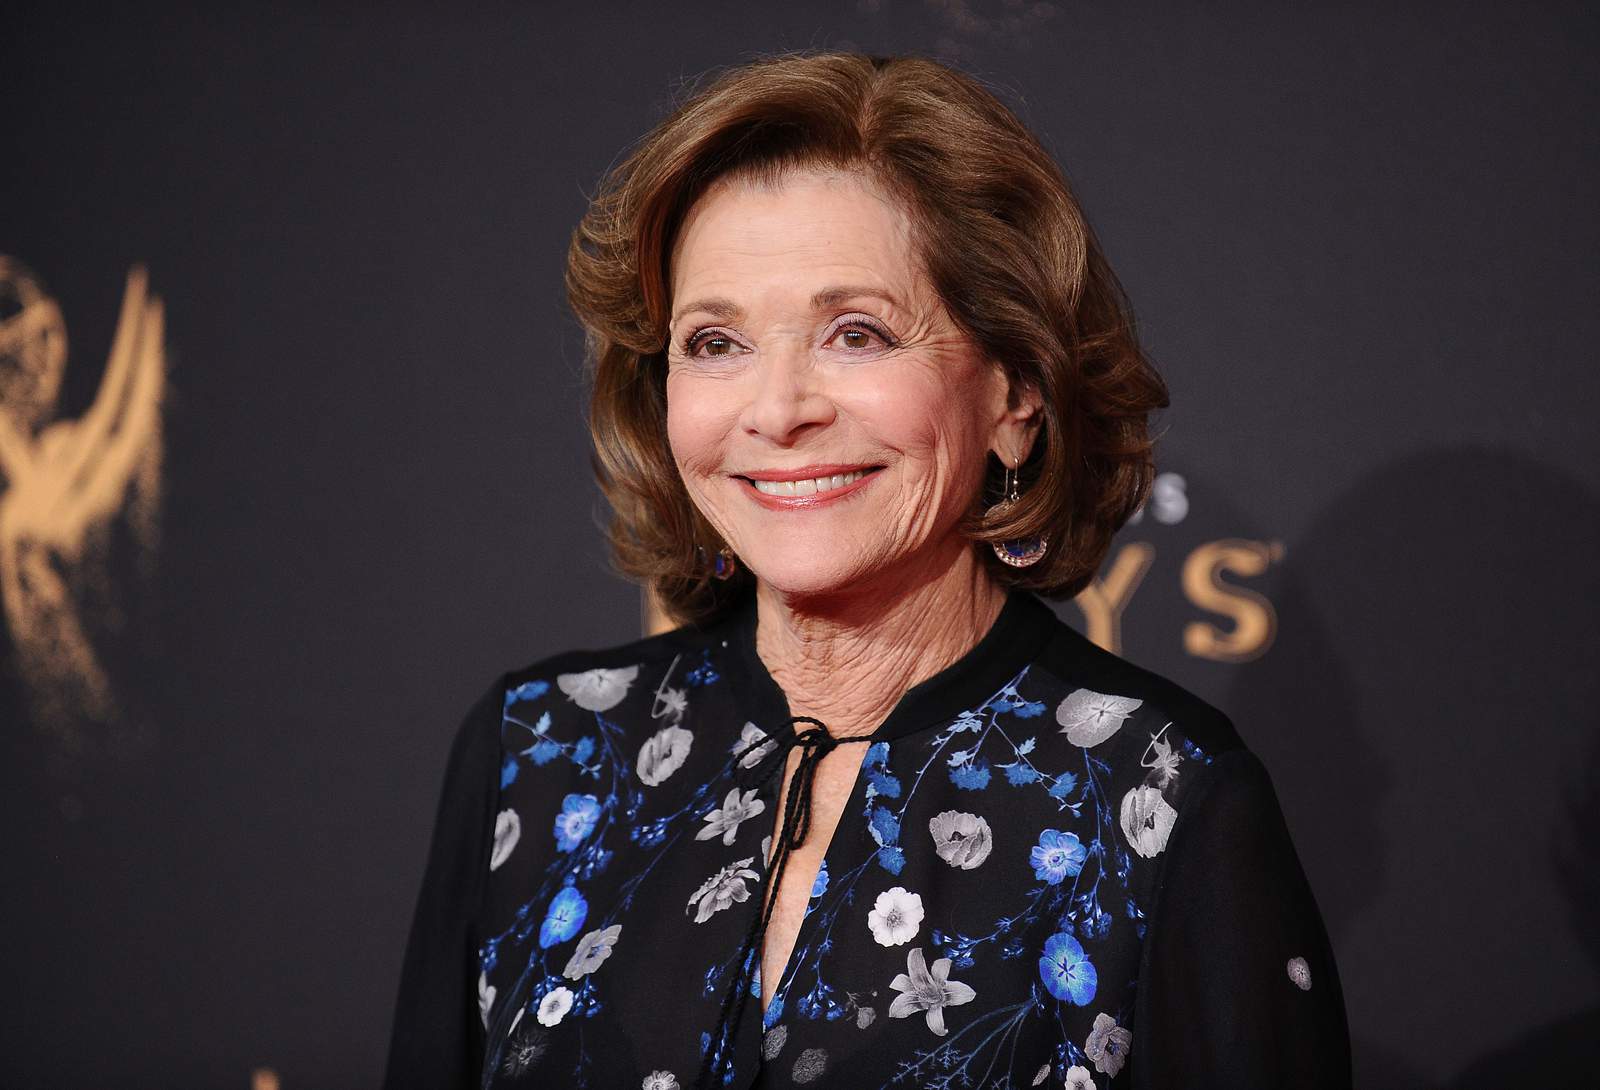 Celebrities, fans react to death of ‘Arrested Development’ actress Jessica Walter